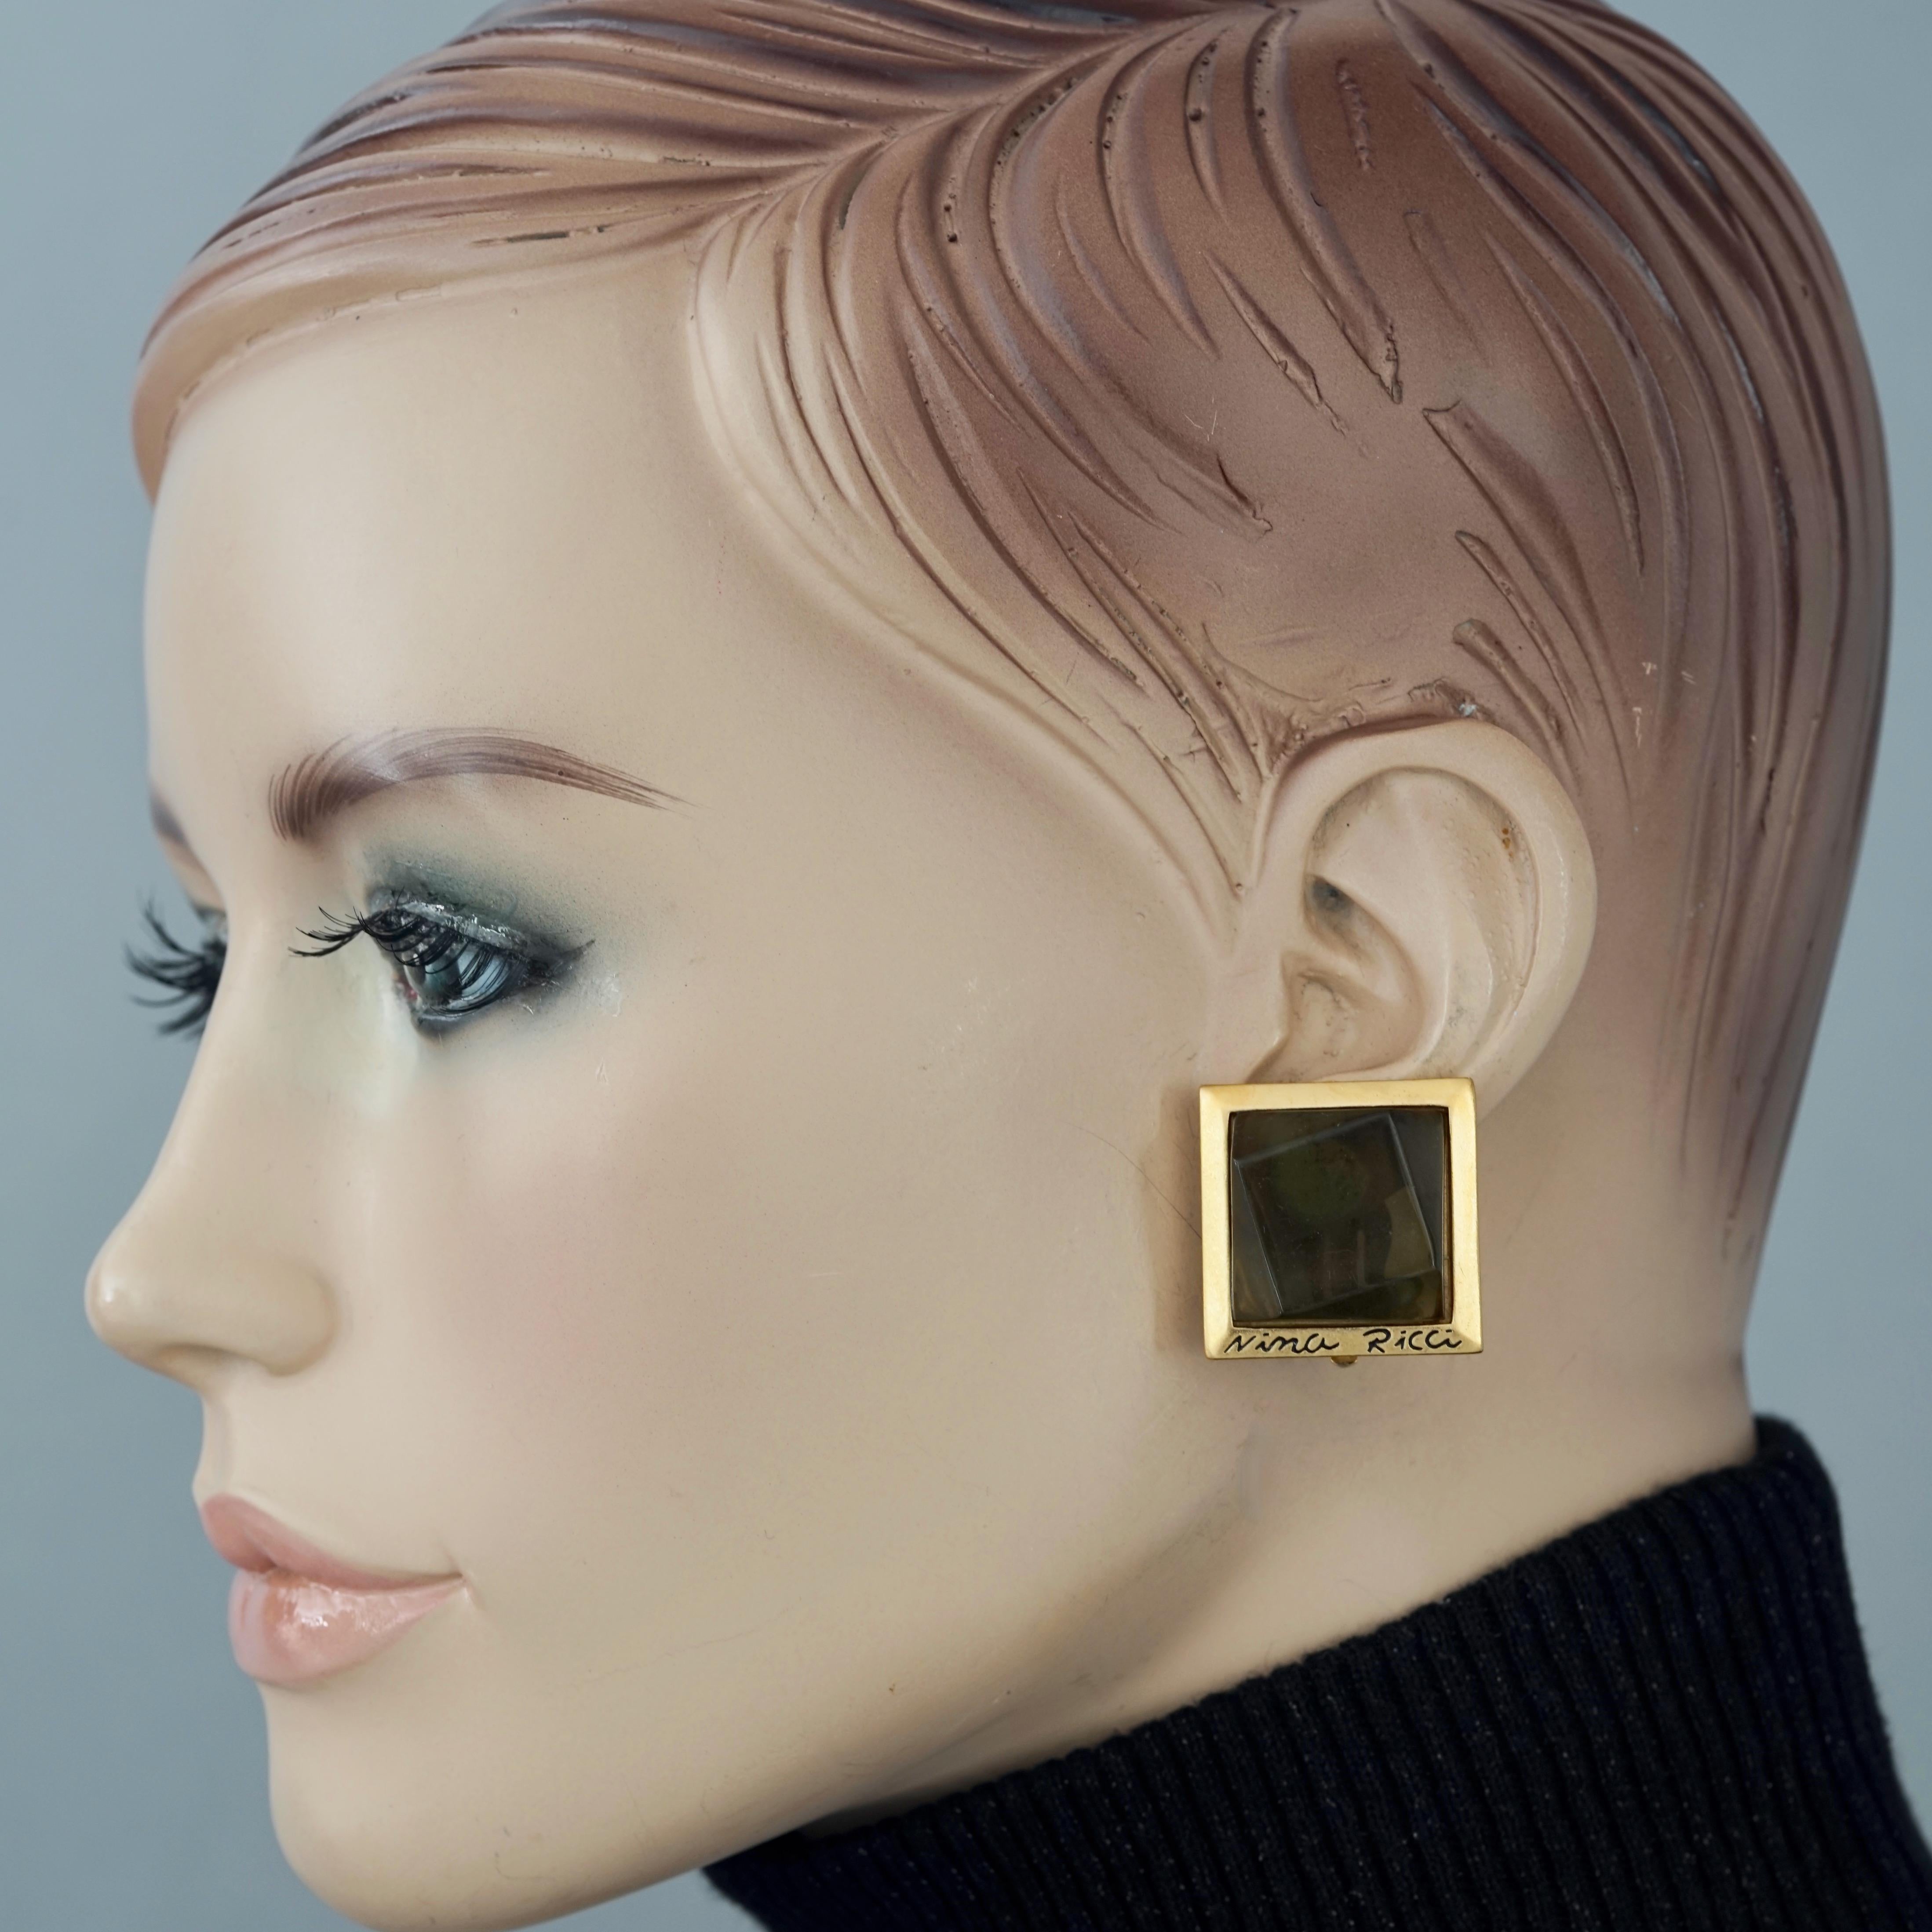 Vintage NINA RICCI Geometric Square Earrings

Measurements:
Height: 1.02 inches (2.6 cm)
Width: 1.02 inches (2.6 cm)
Weight per Earring: 11 grams

Features:
- 100% Authentic NINA RICCI.
- Geometric square earrings in olive green resin.
- Engraved